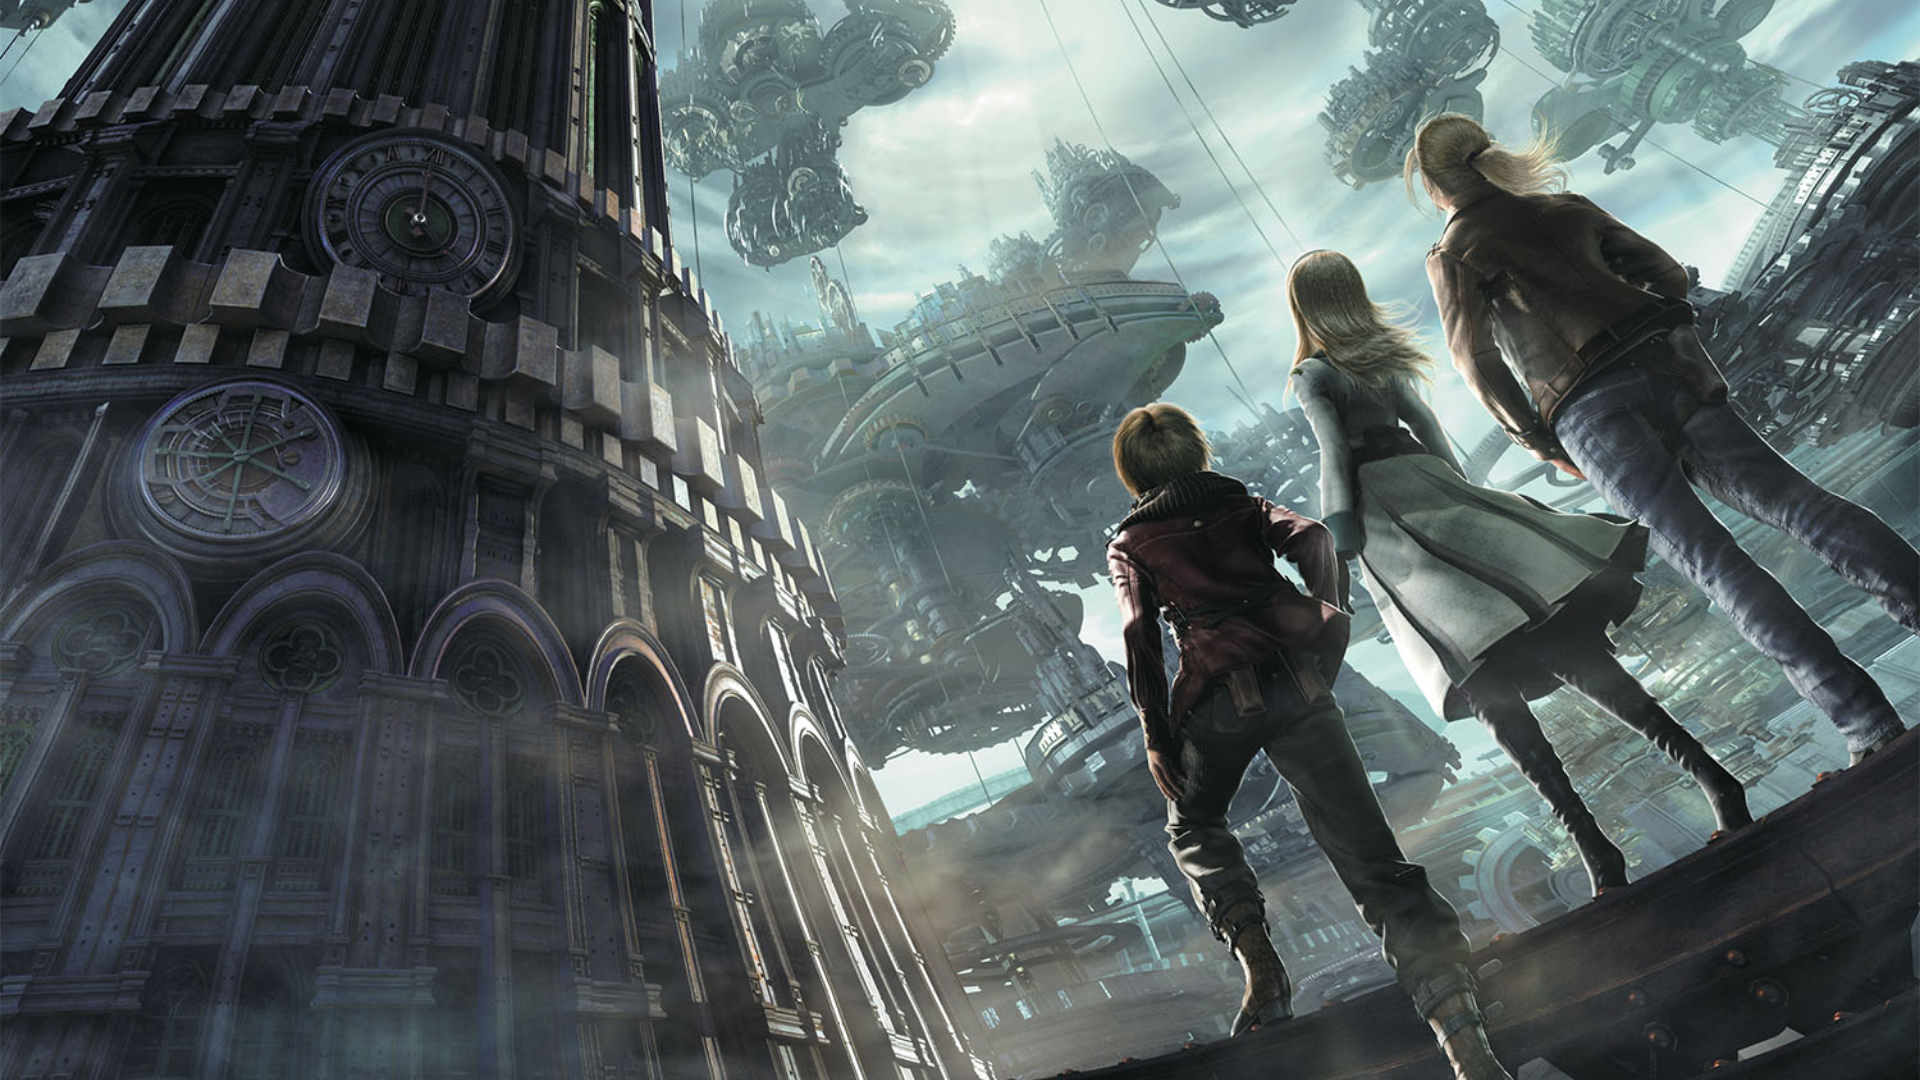 General 1920x1080 Resonance of fate basel video games video game art